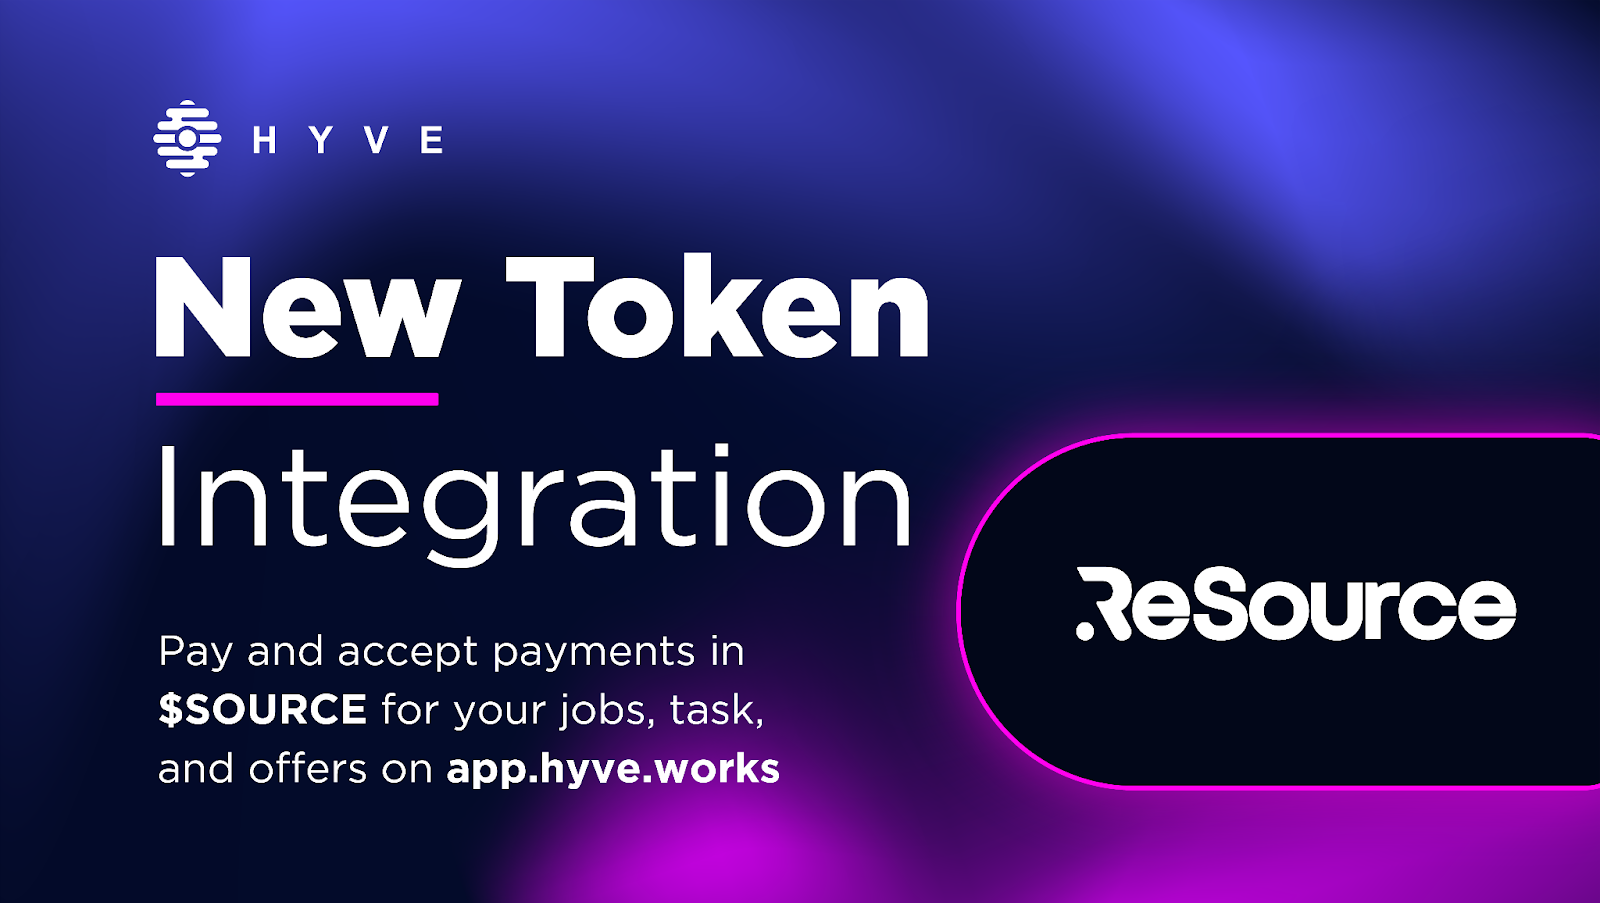 New Token Integration: Pay now in $SOURCE on HYVE